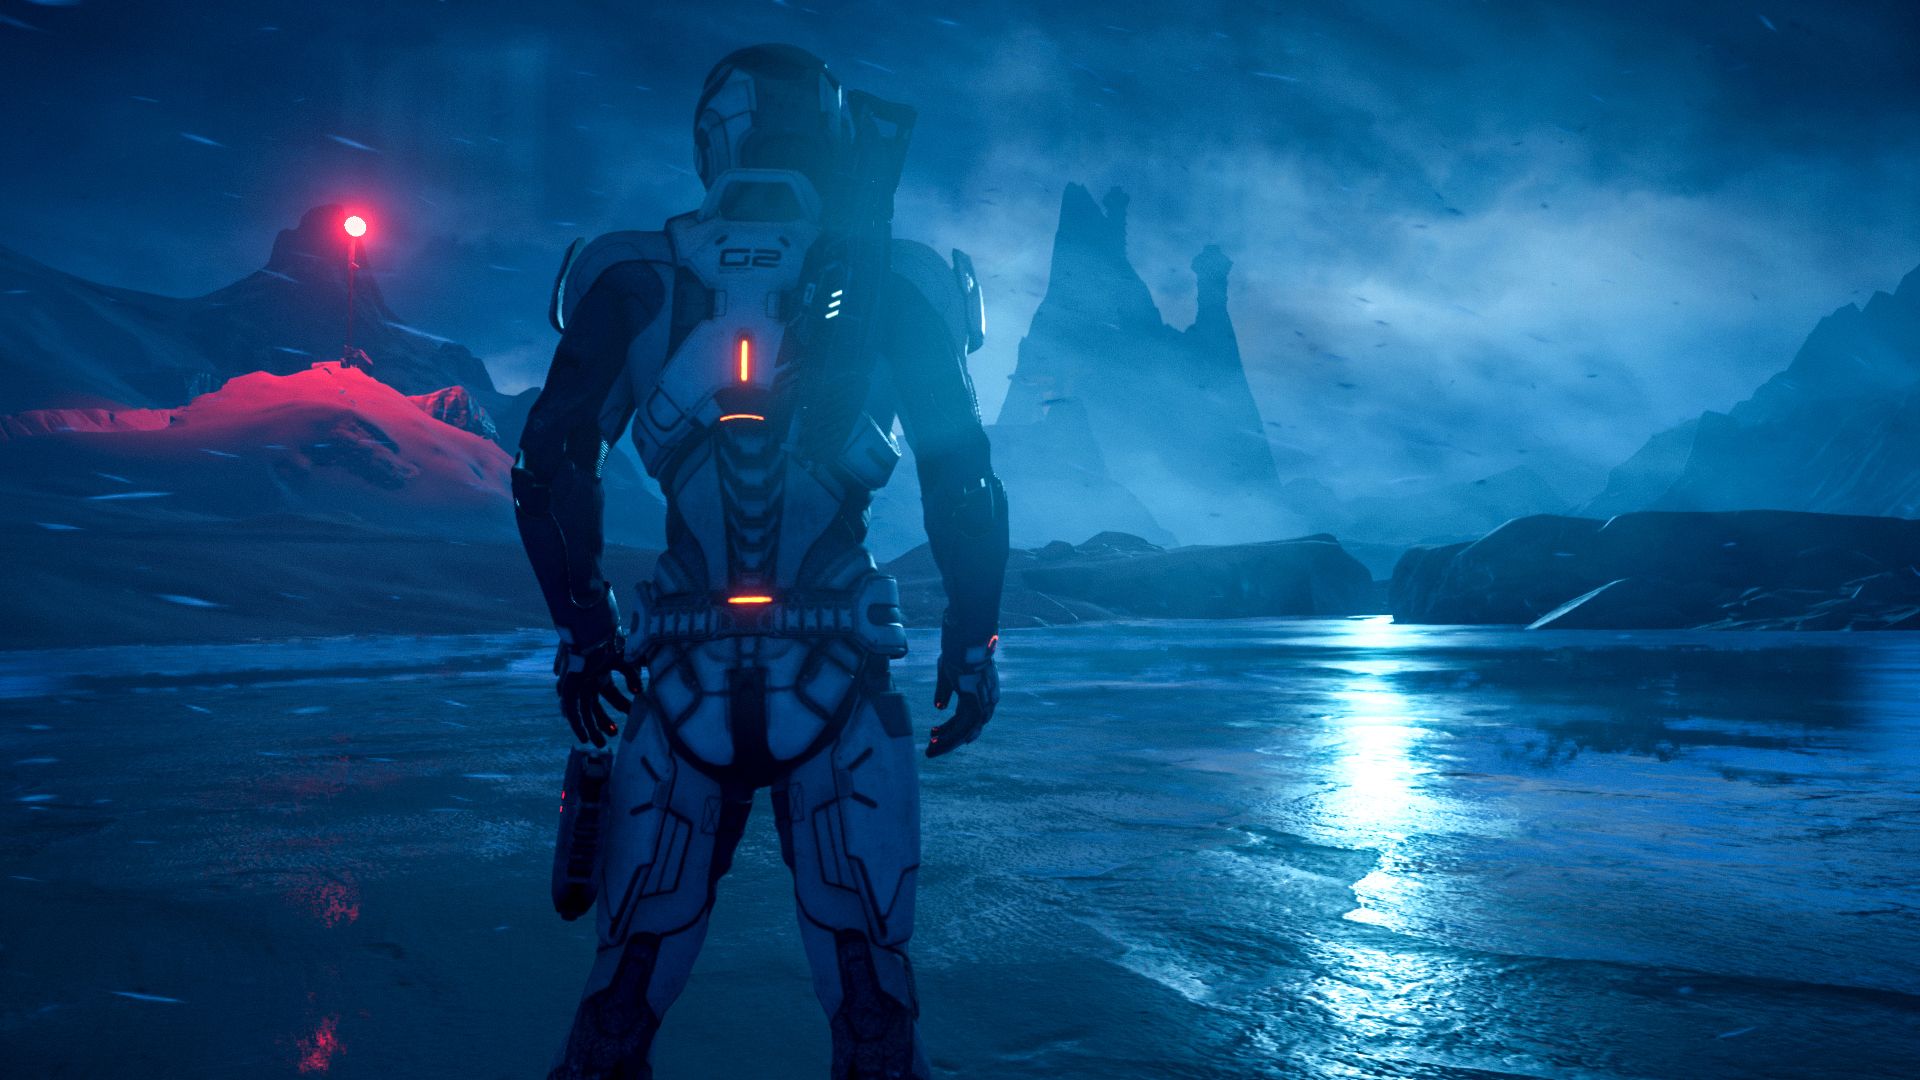 Video Game Mass Effect: Andromeda HD Wallpaper | Background Image